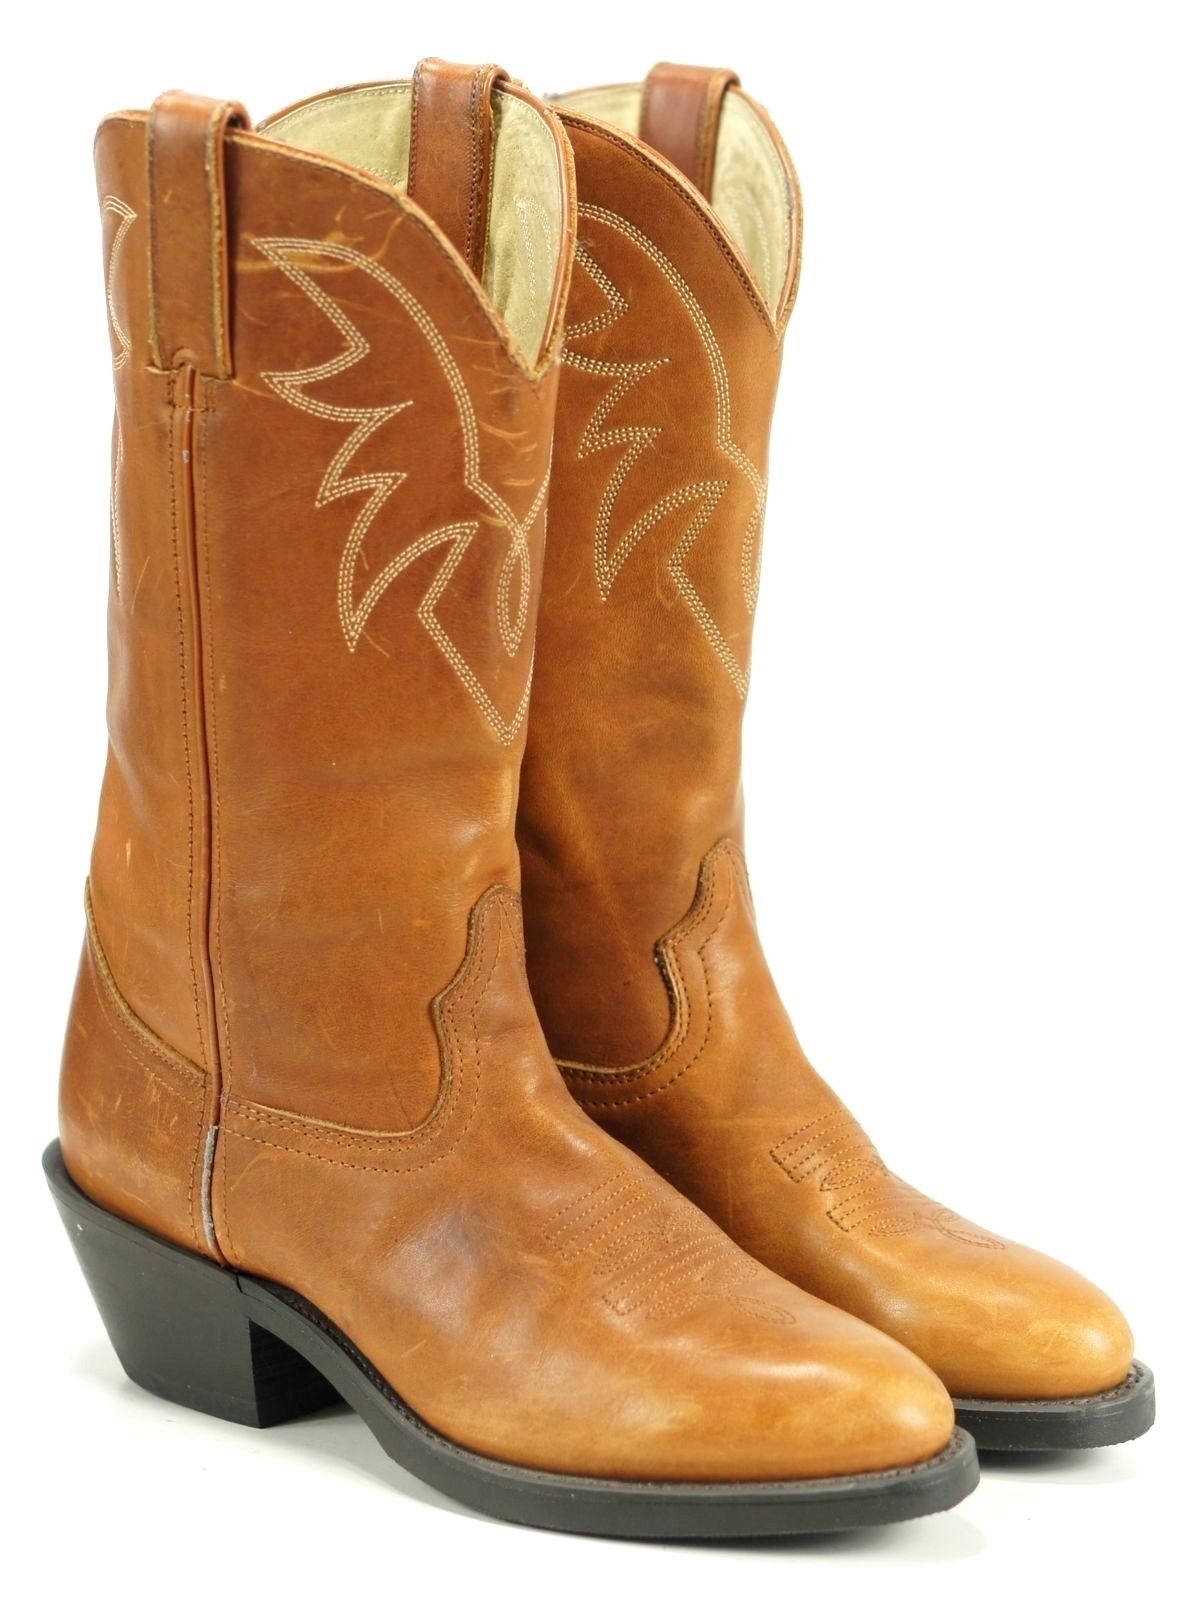 Durango Women's Brown Leather Cowboy Work Boots RD762 Discontinued 6.5 ...